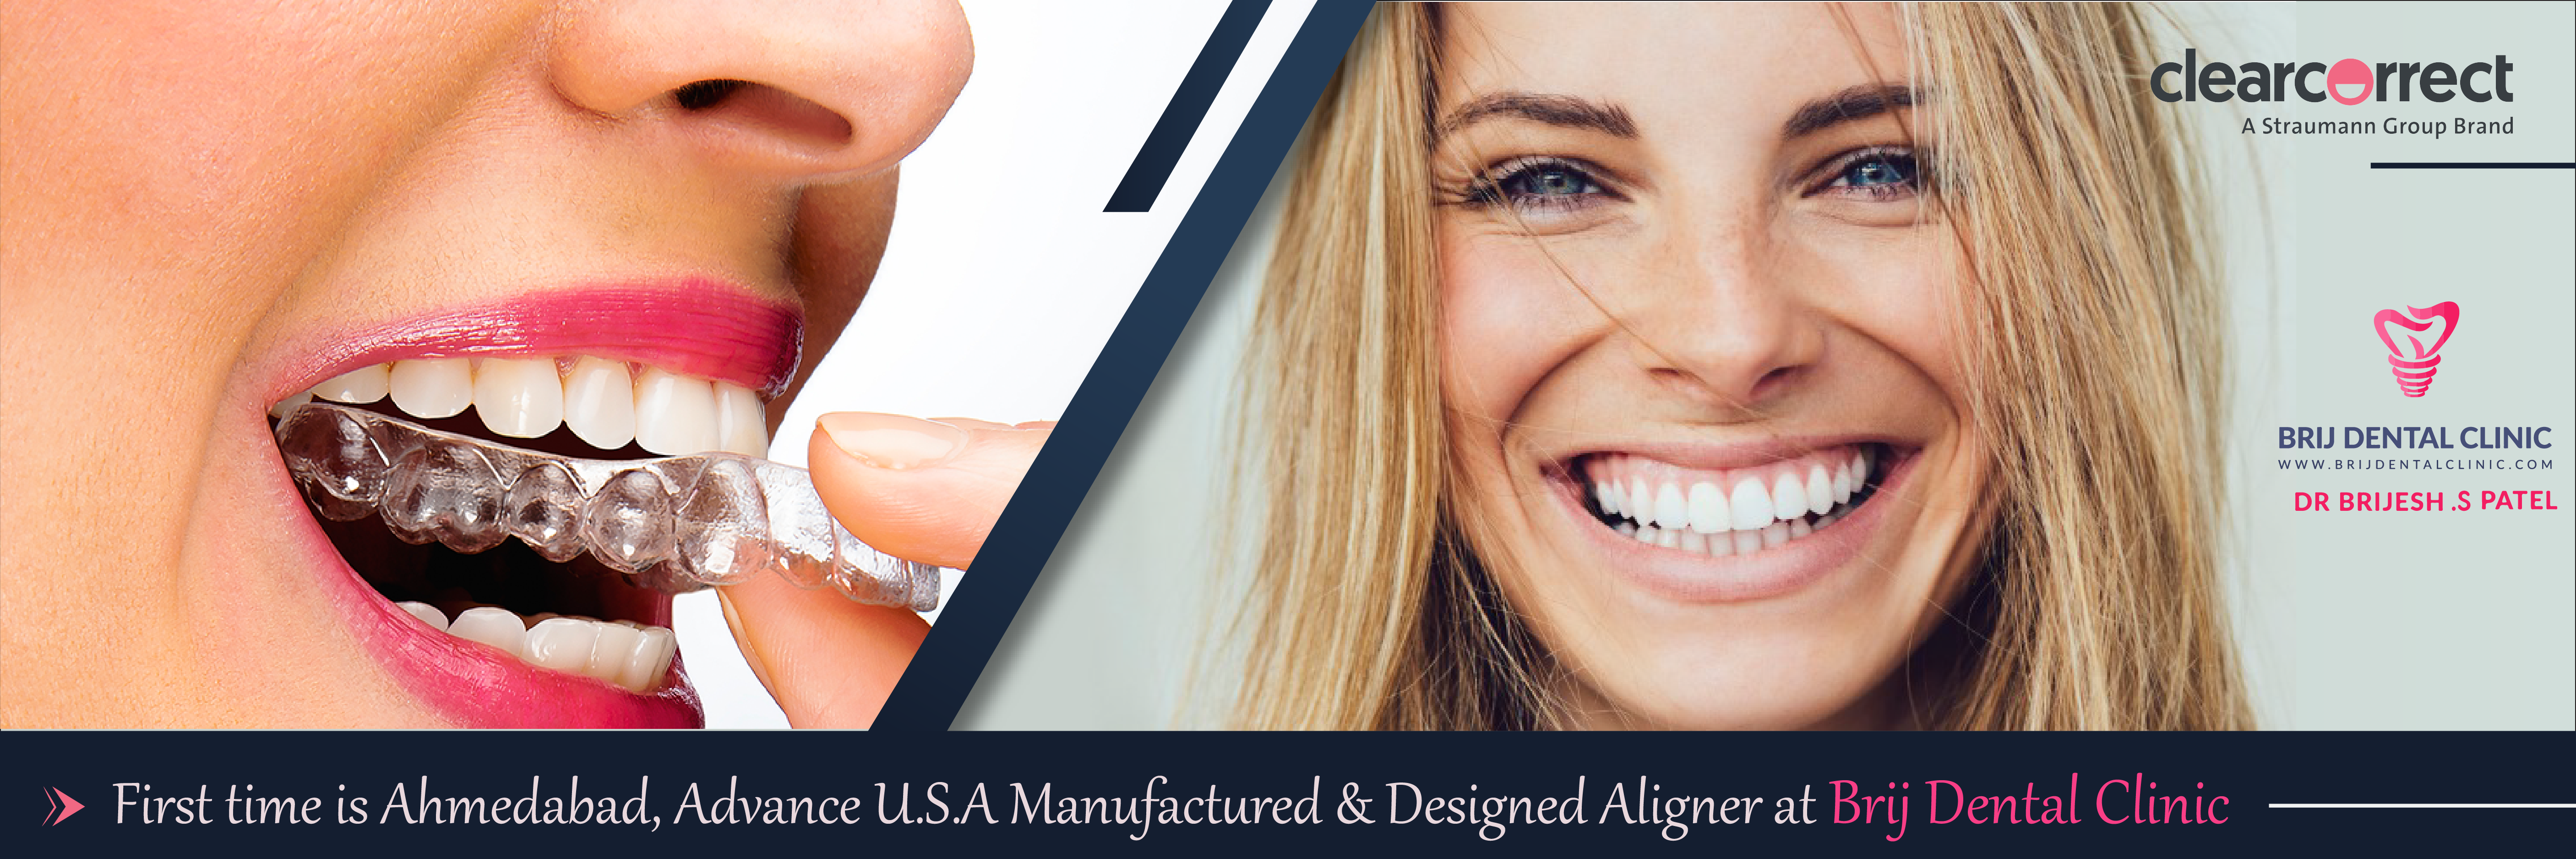 Best Clear Aligner Technology in Ahmedabad india.